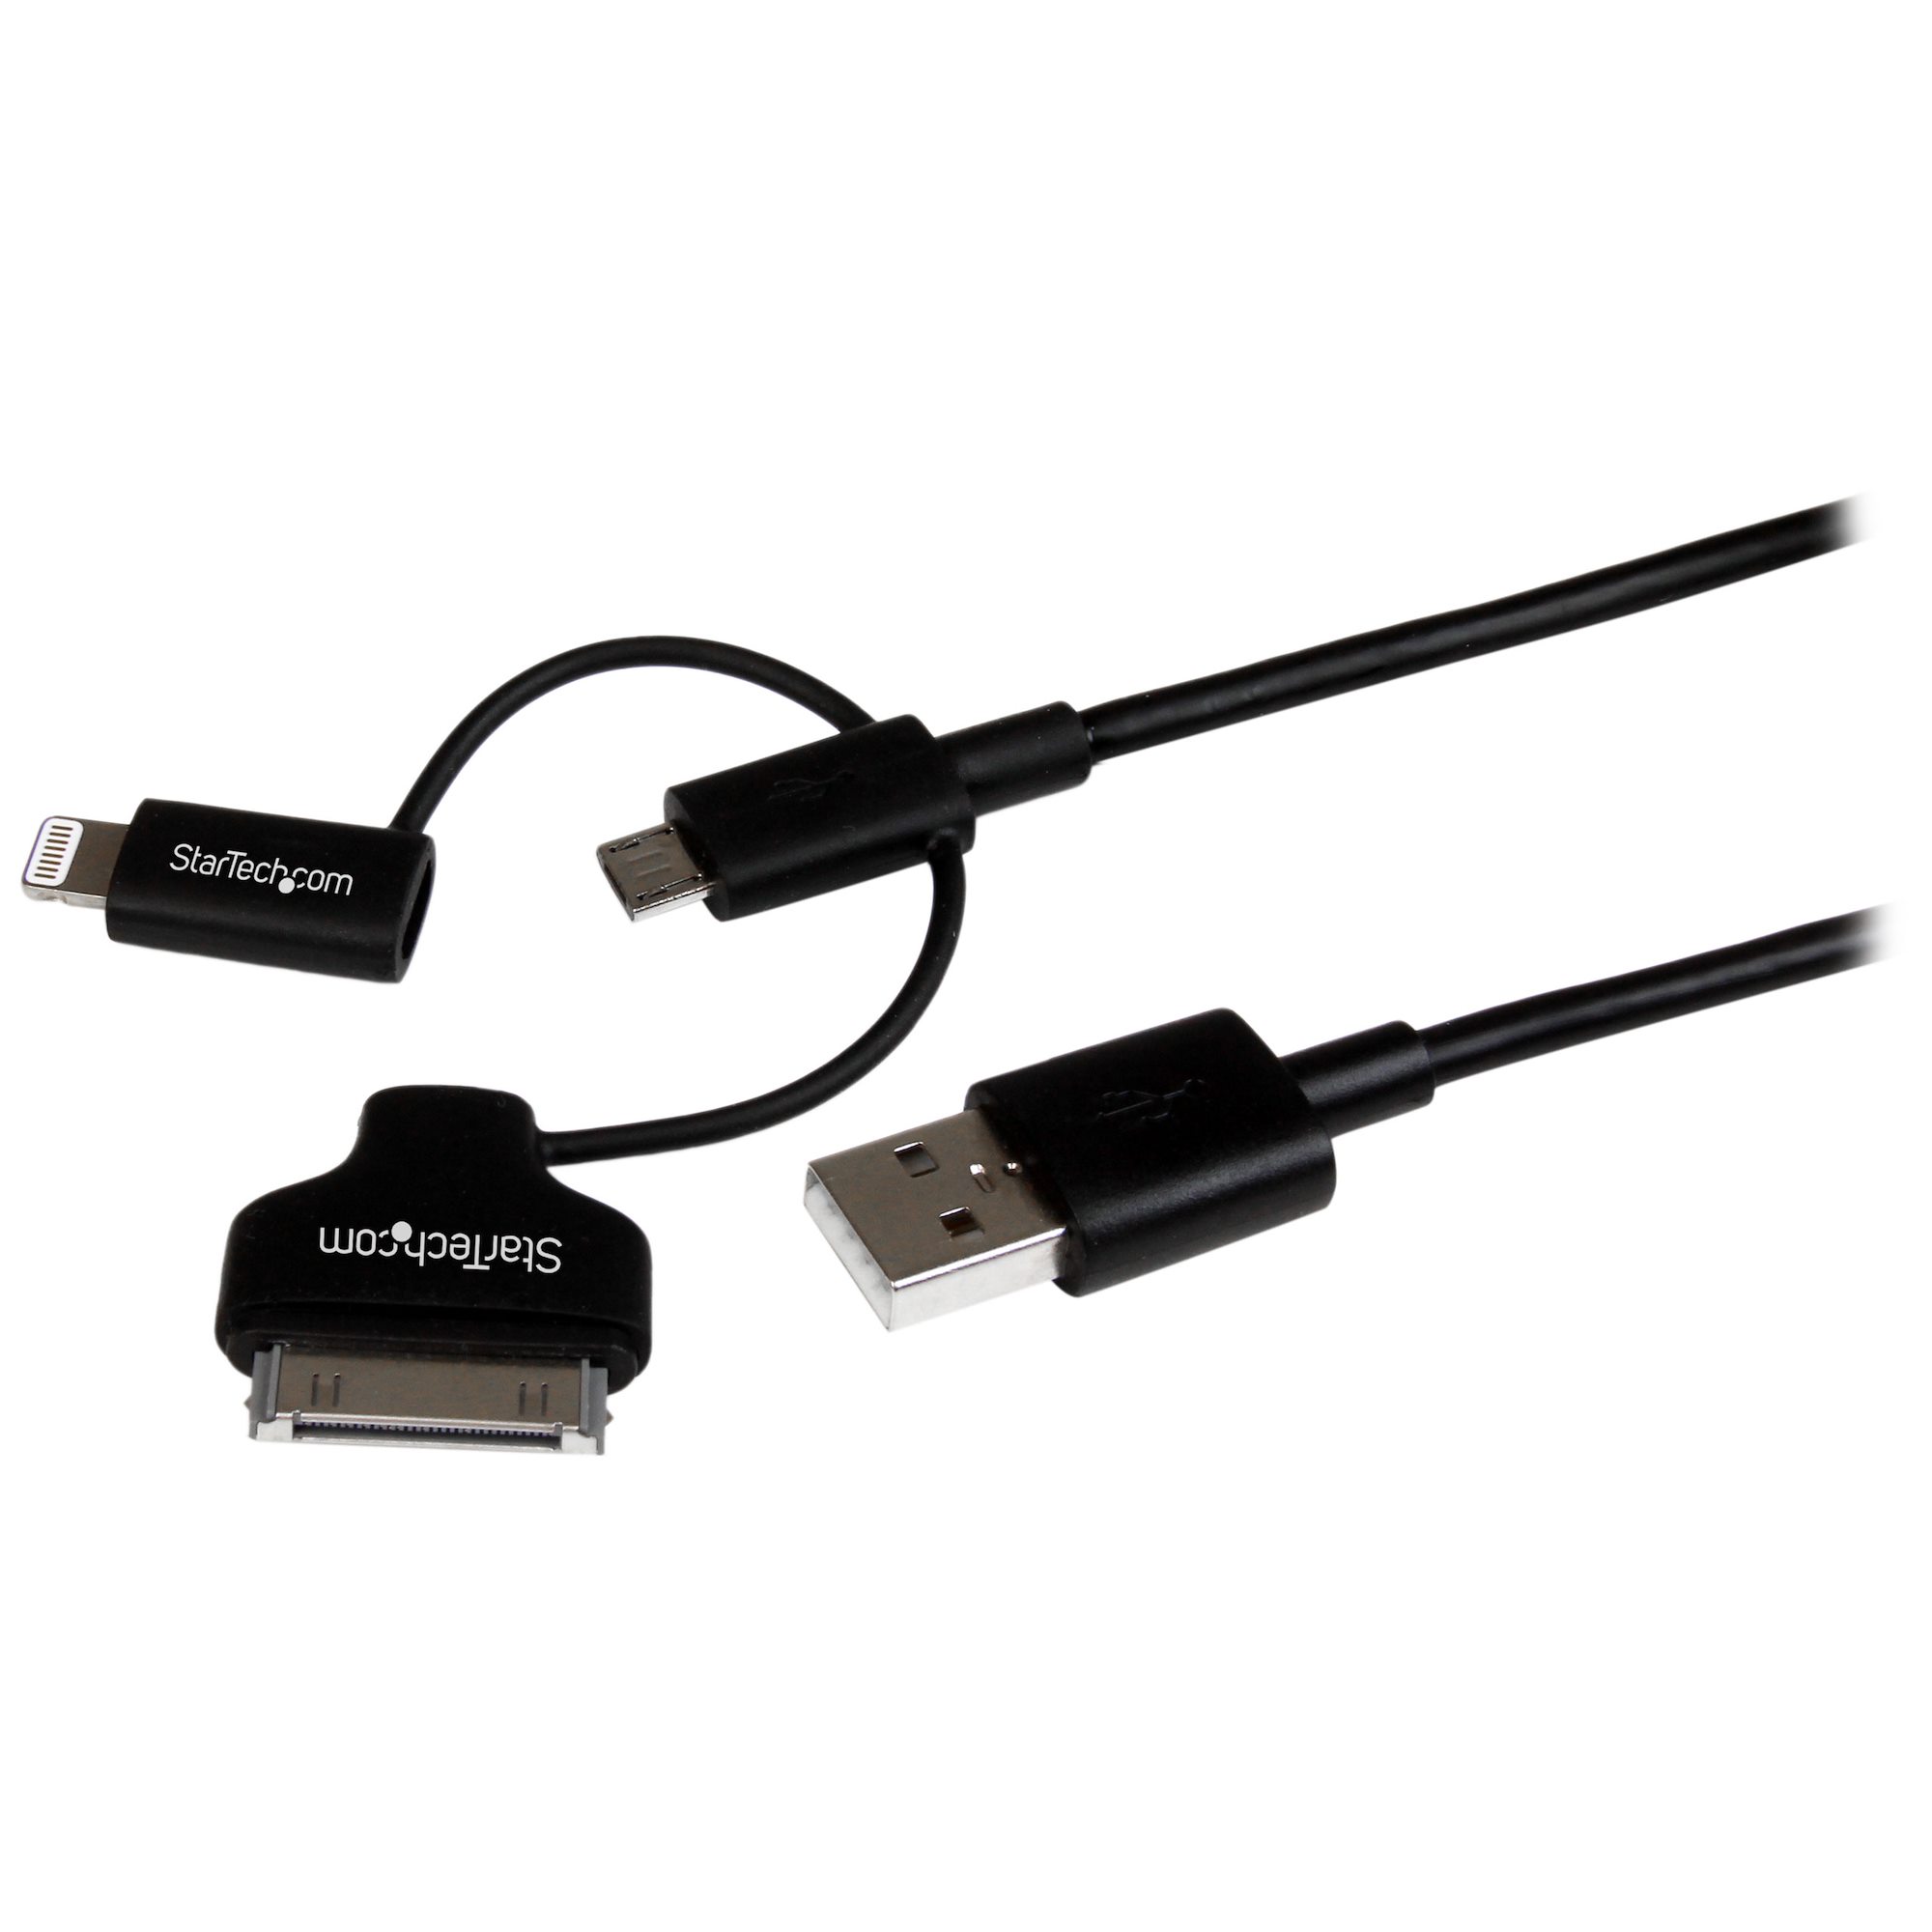 1m Lightning/Dock/Micro USB to USB Cable - Cables | StarTech.com